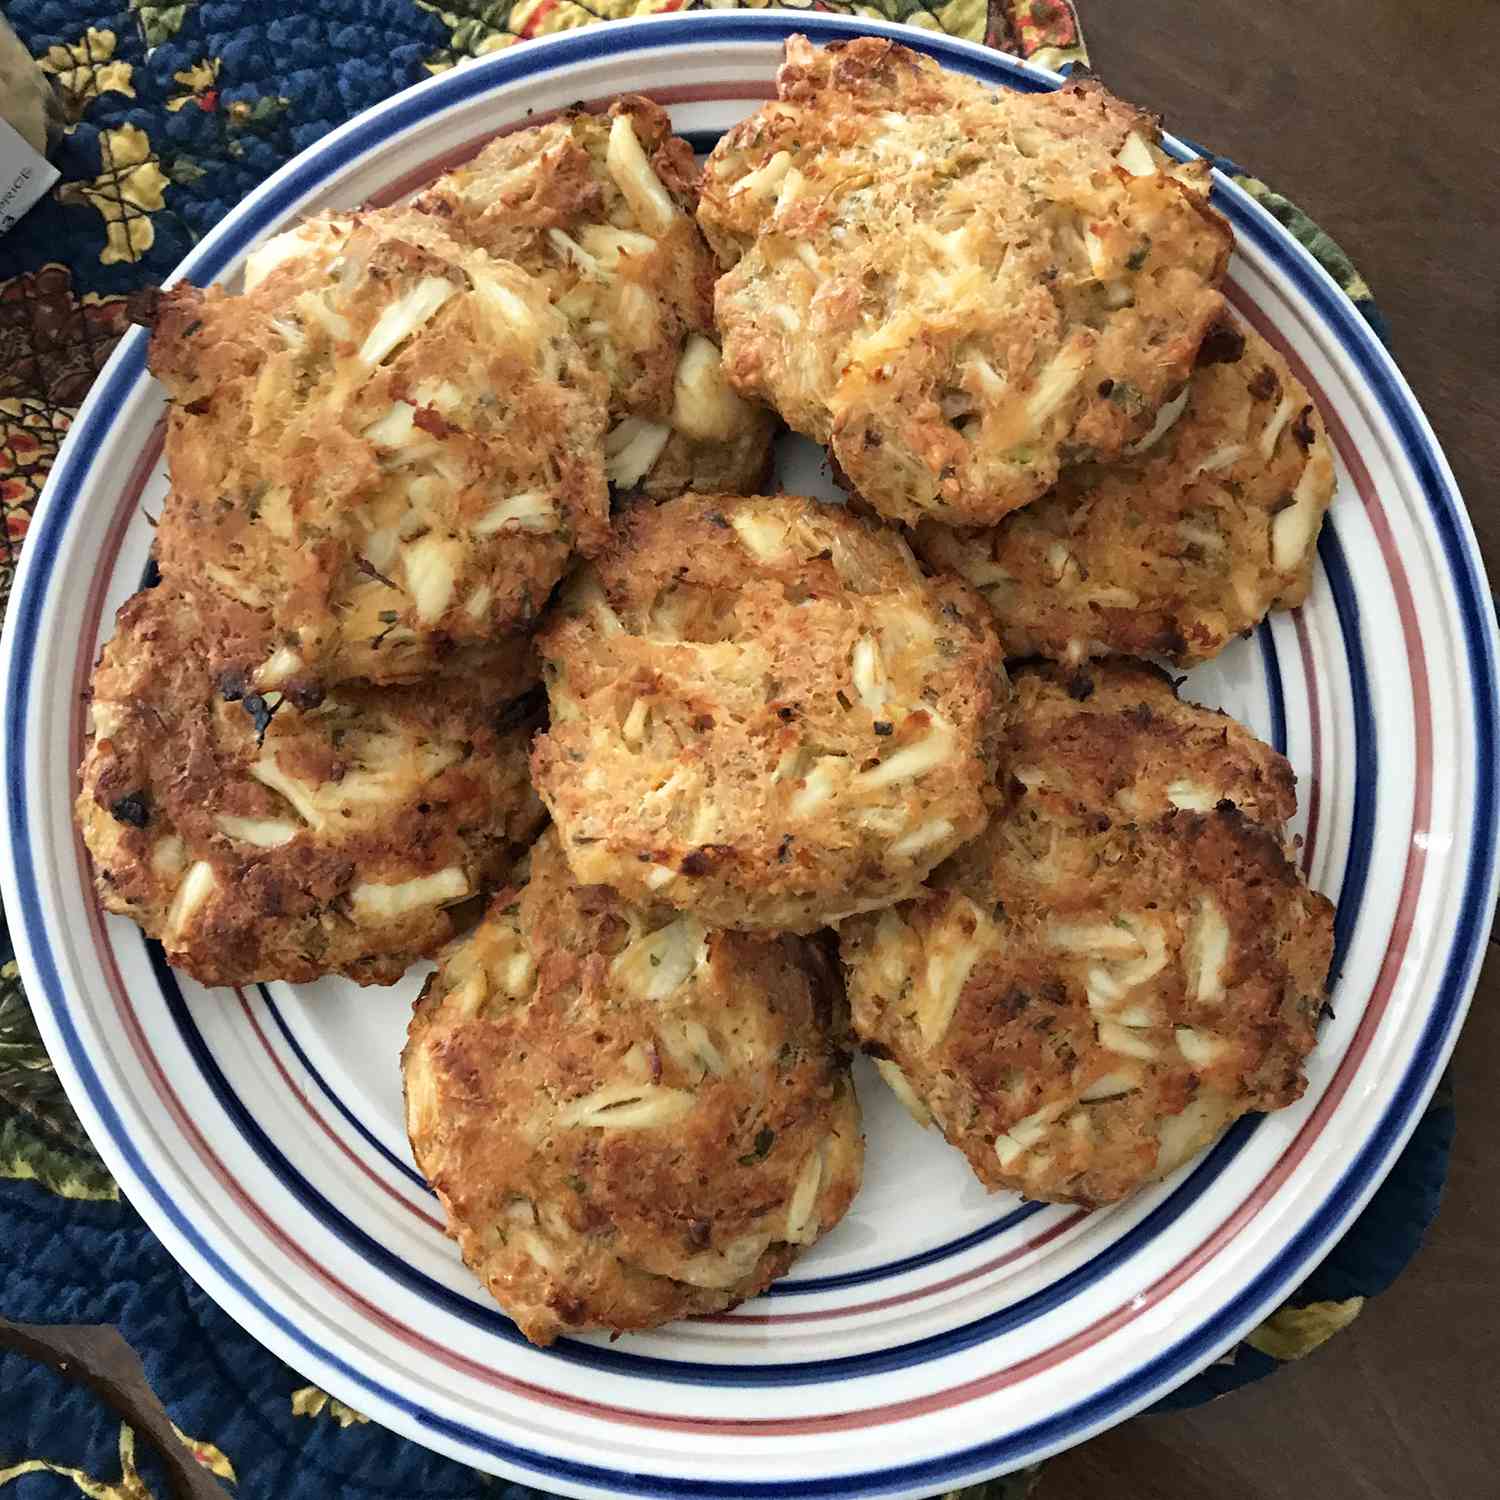 Overhead view of crab cakes on a platter